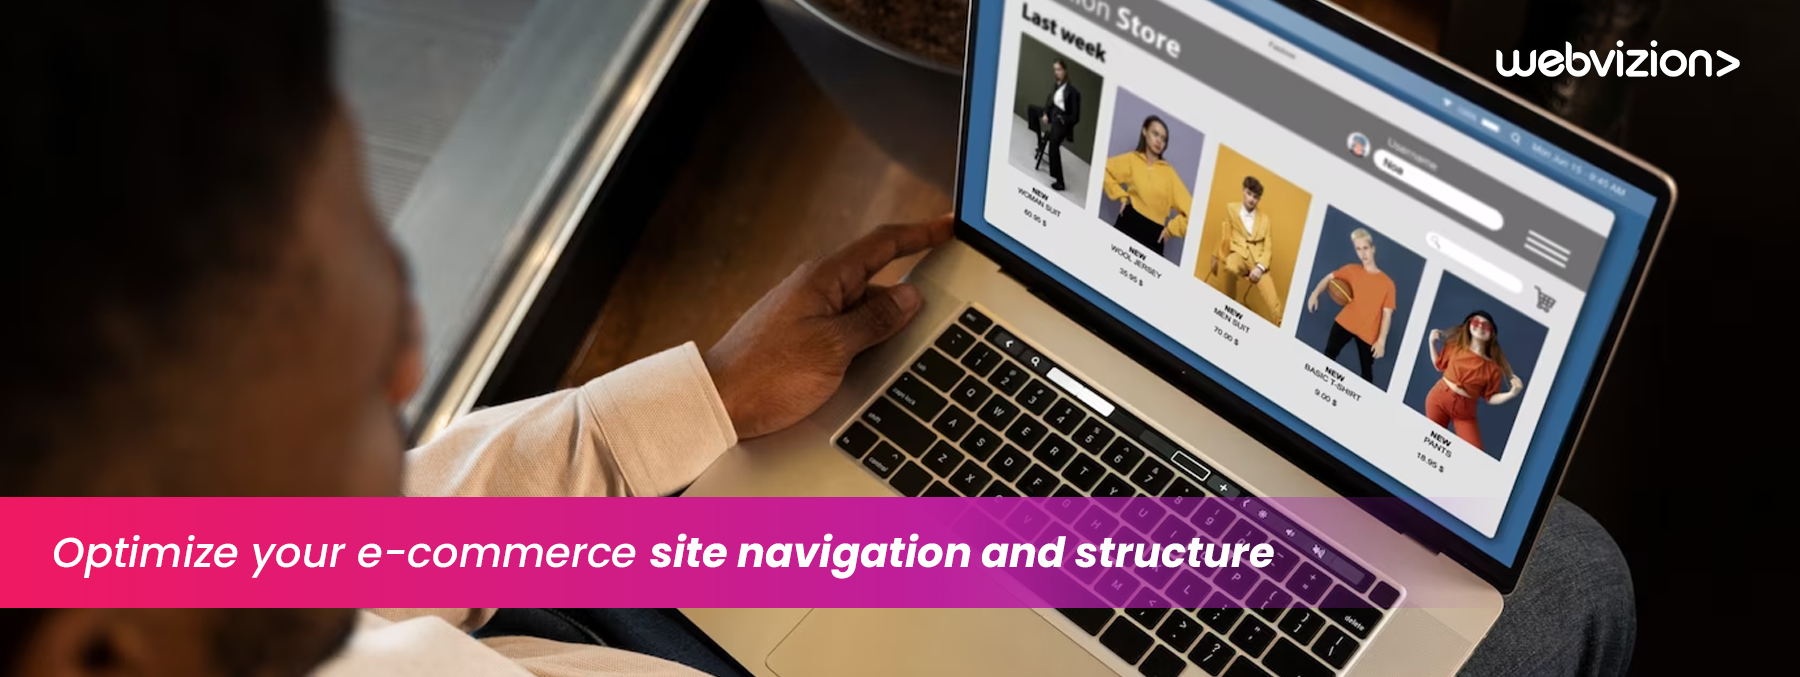 Optimize-your-e-commerce-site-navigation-and-structure-Webvizion-Global